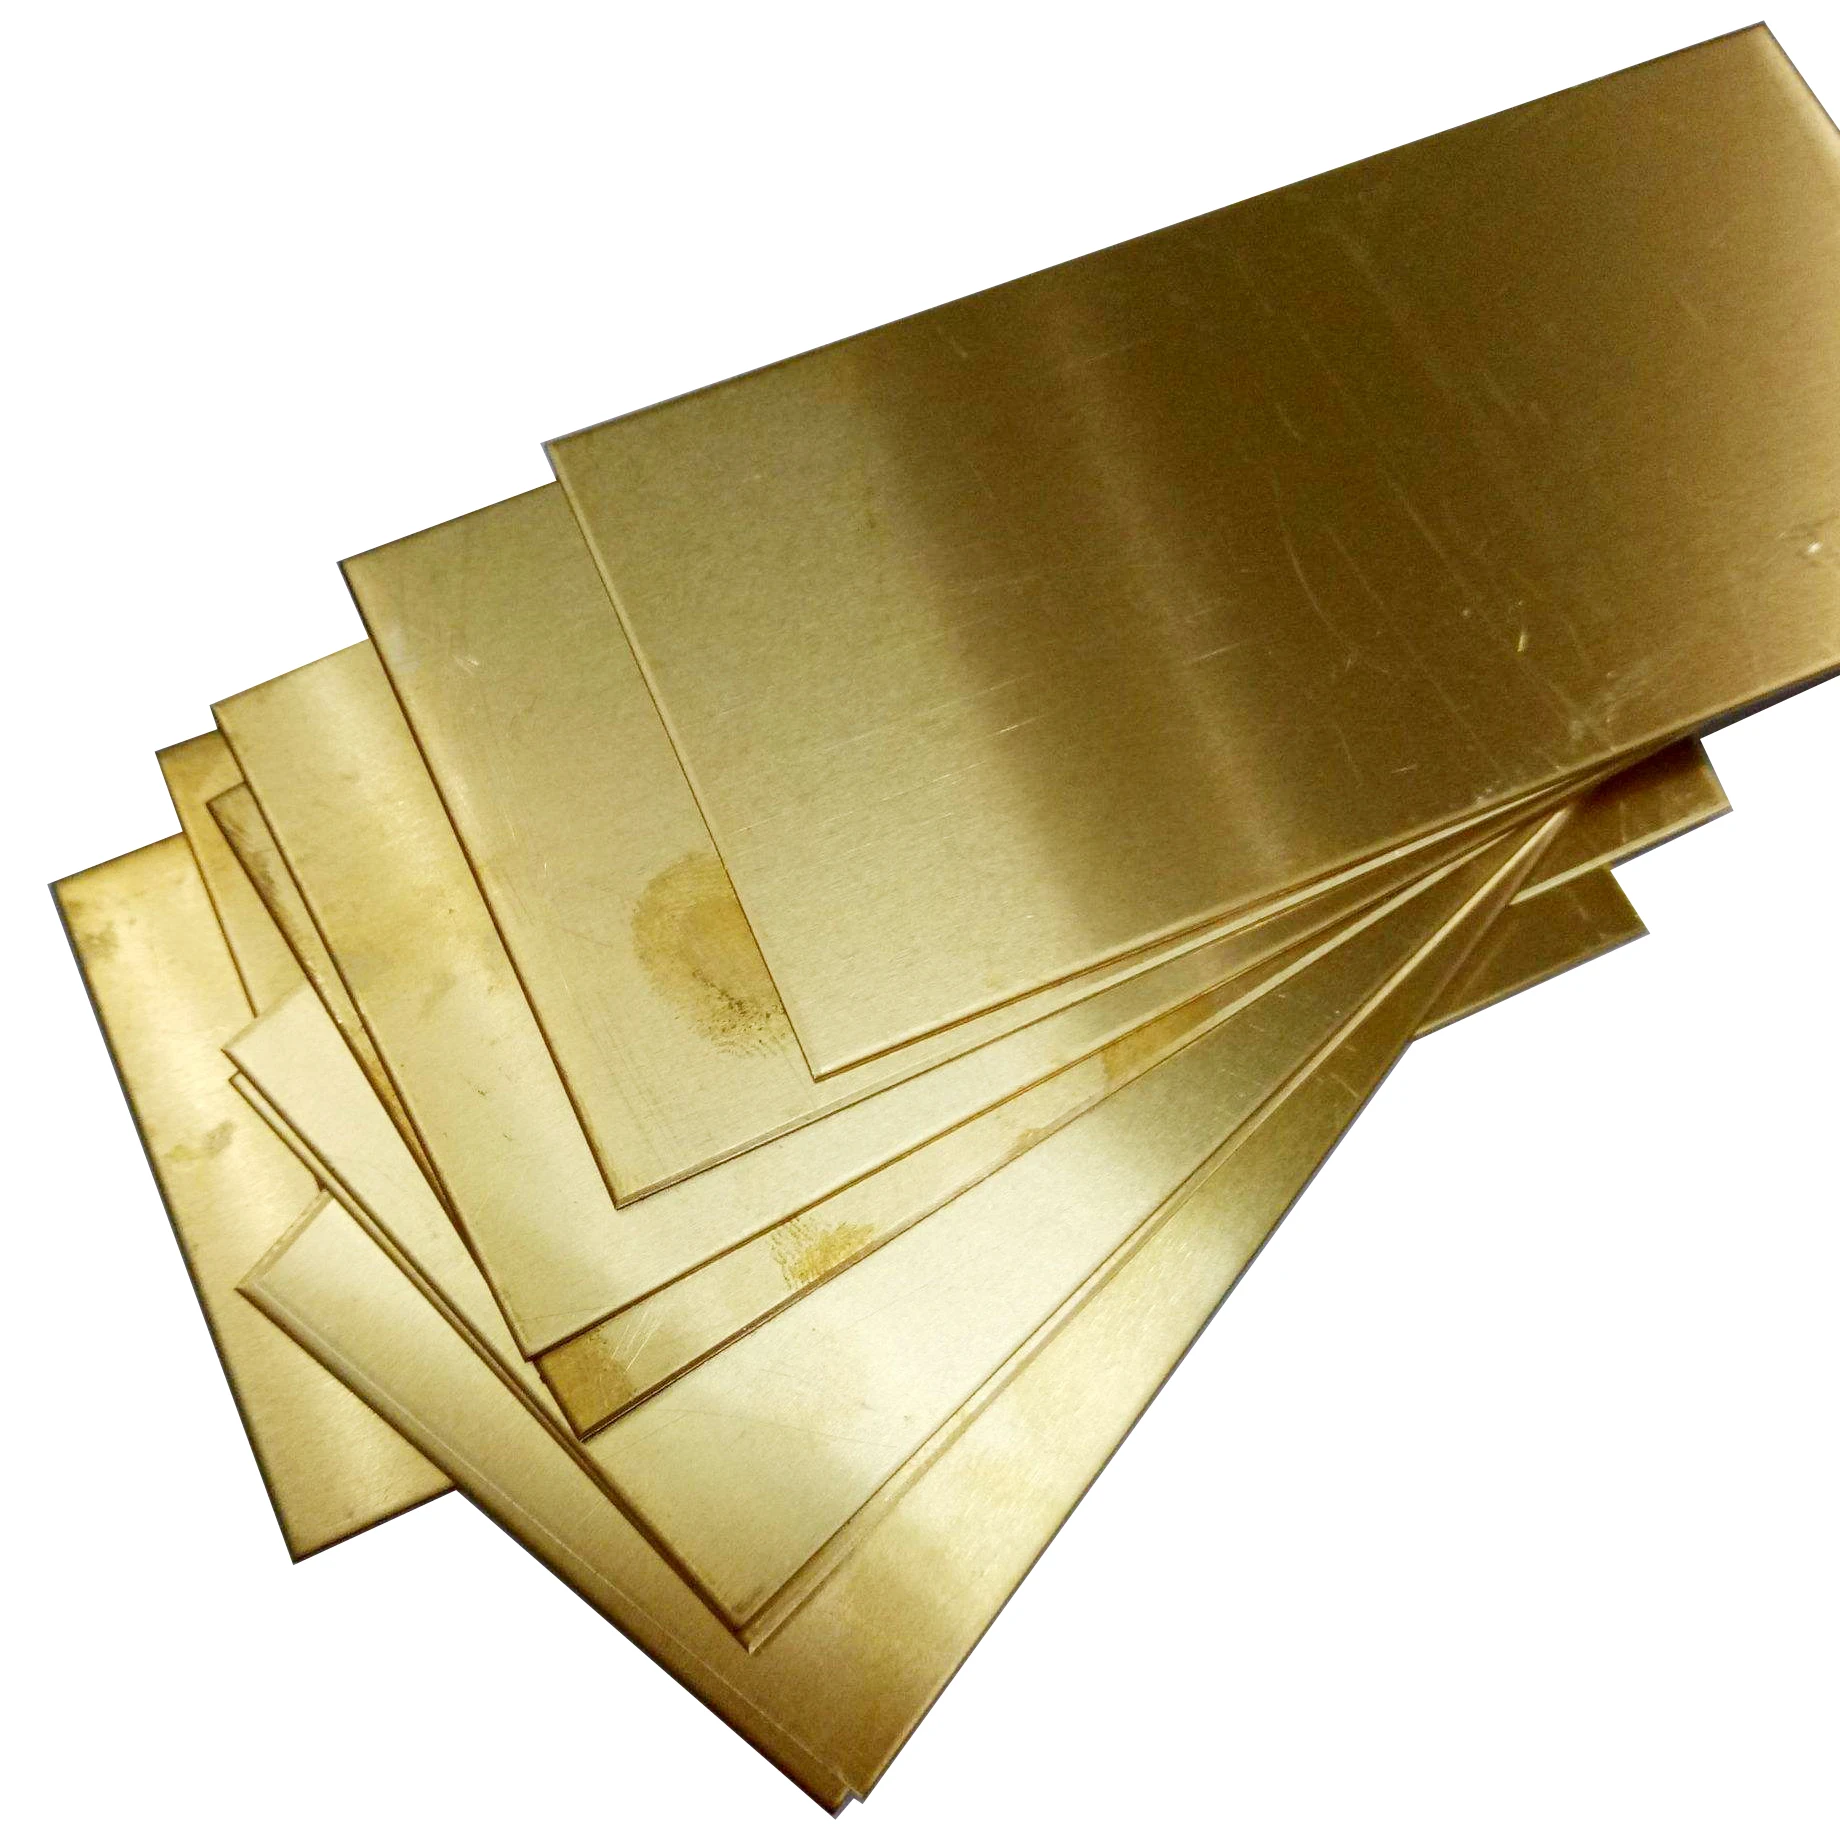 Cube2 copper T2 good quality low price popular product pure copper sheet or brass copper plate gold decoration high quality